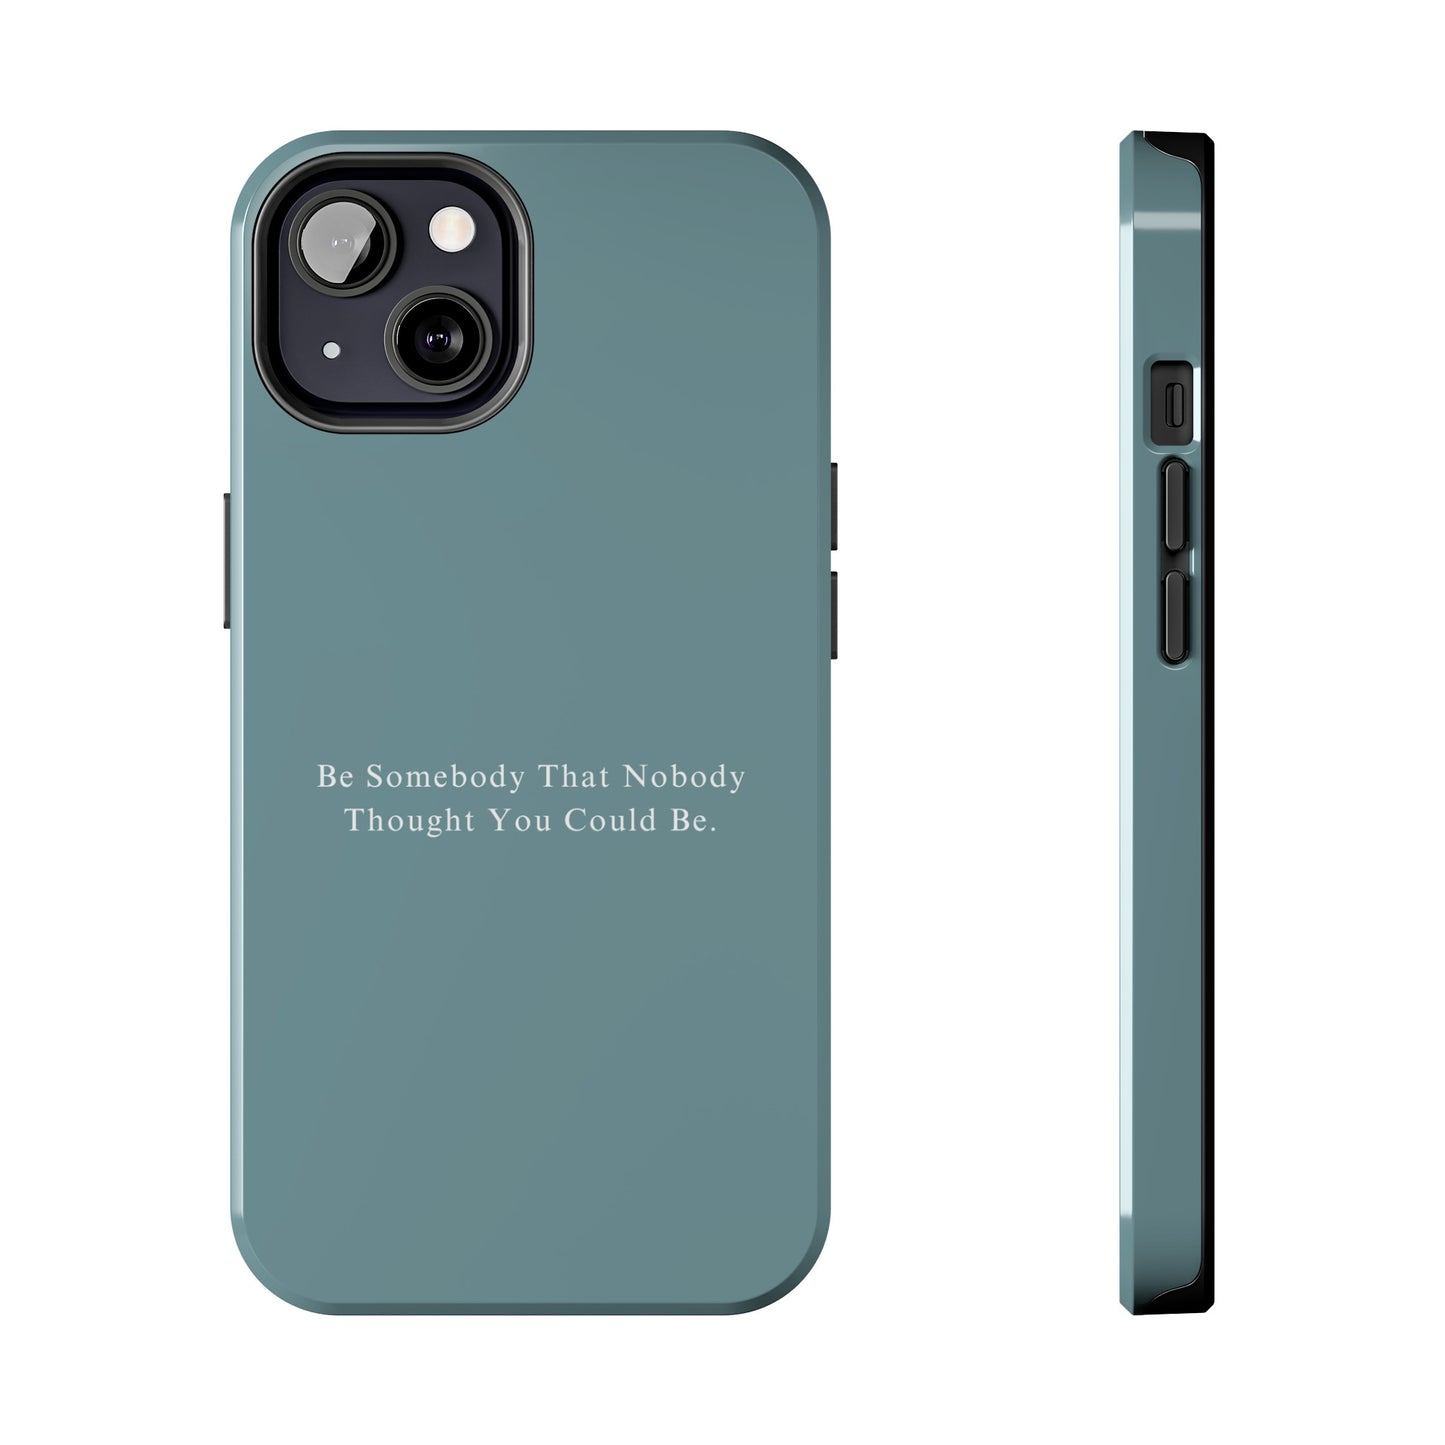 Be Somebody That No Body Thought You Could Be iPhone Case